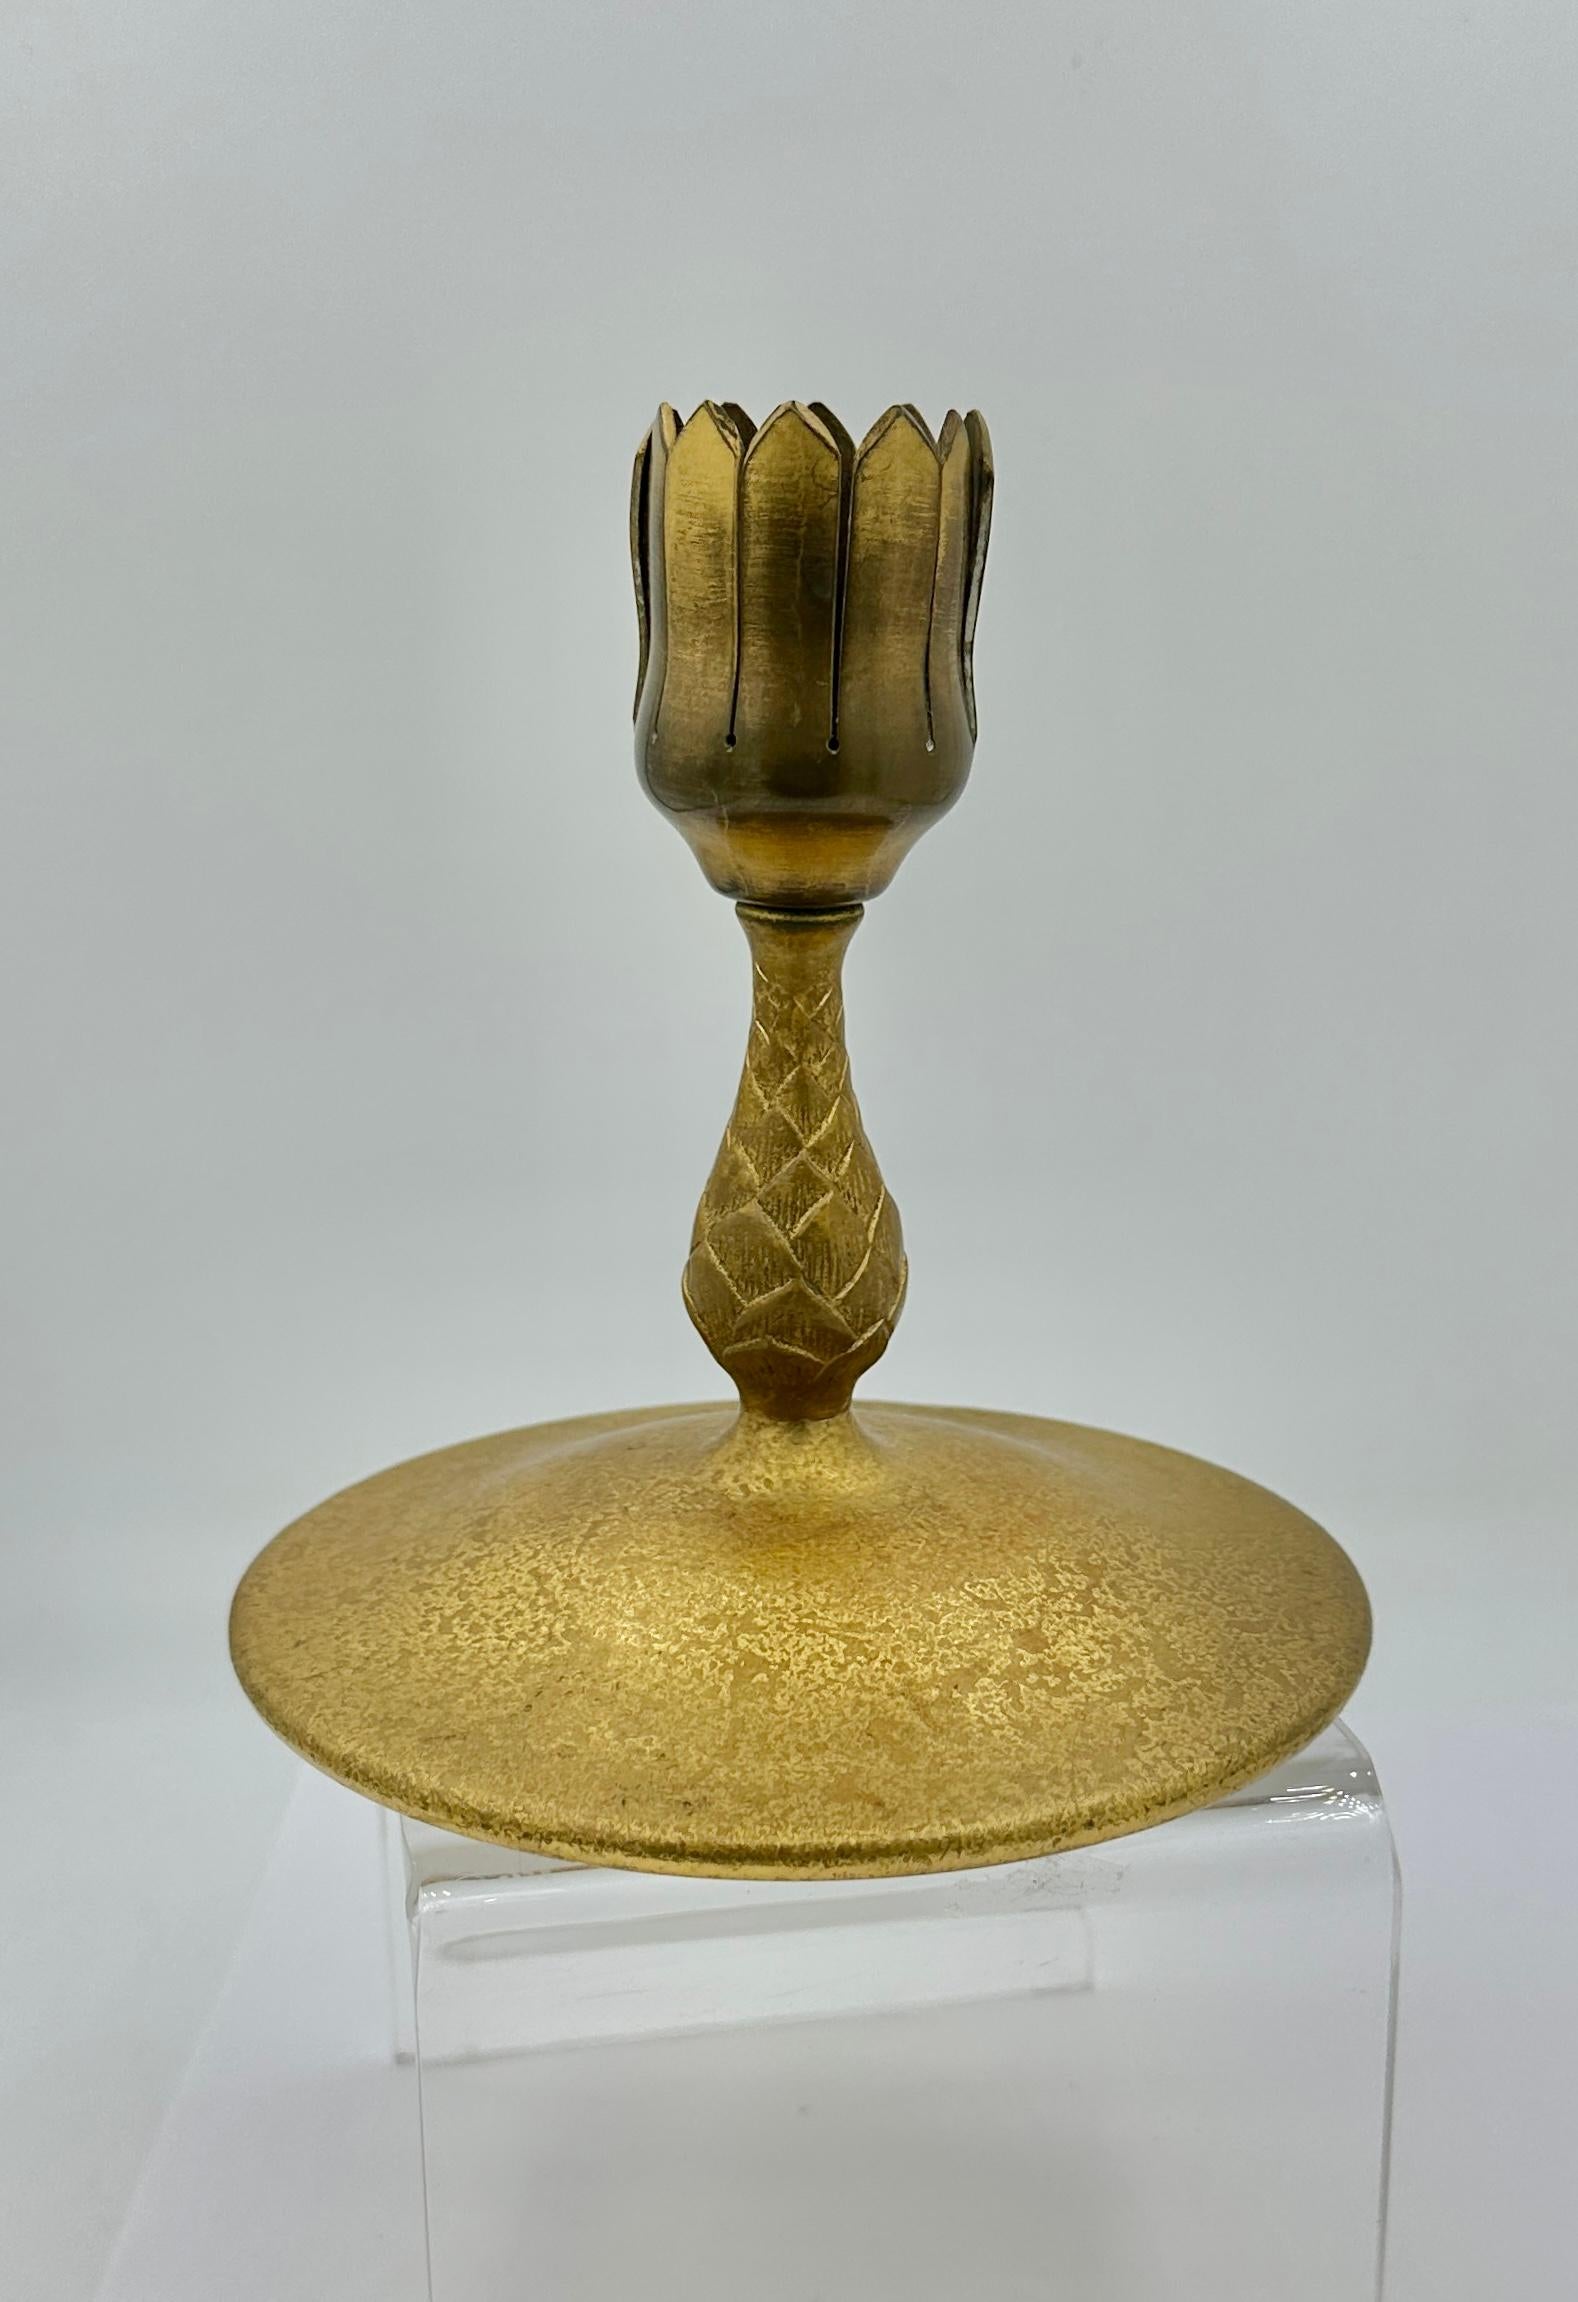 This is an acid-etched Tiffany Studios bronze base for a vase, or it may be used as a candlestick.  It is a standalone candlestick without the glass vase or insert. The tongs that hold a vase in place are in excellent condition, and the bottom is